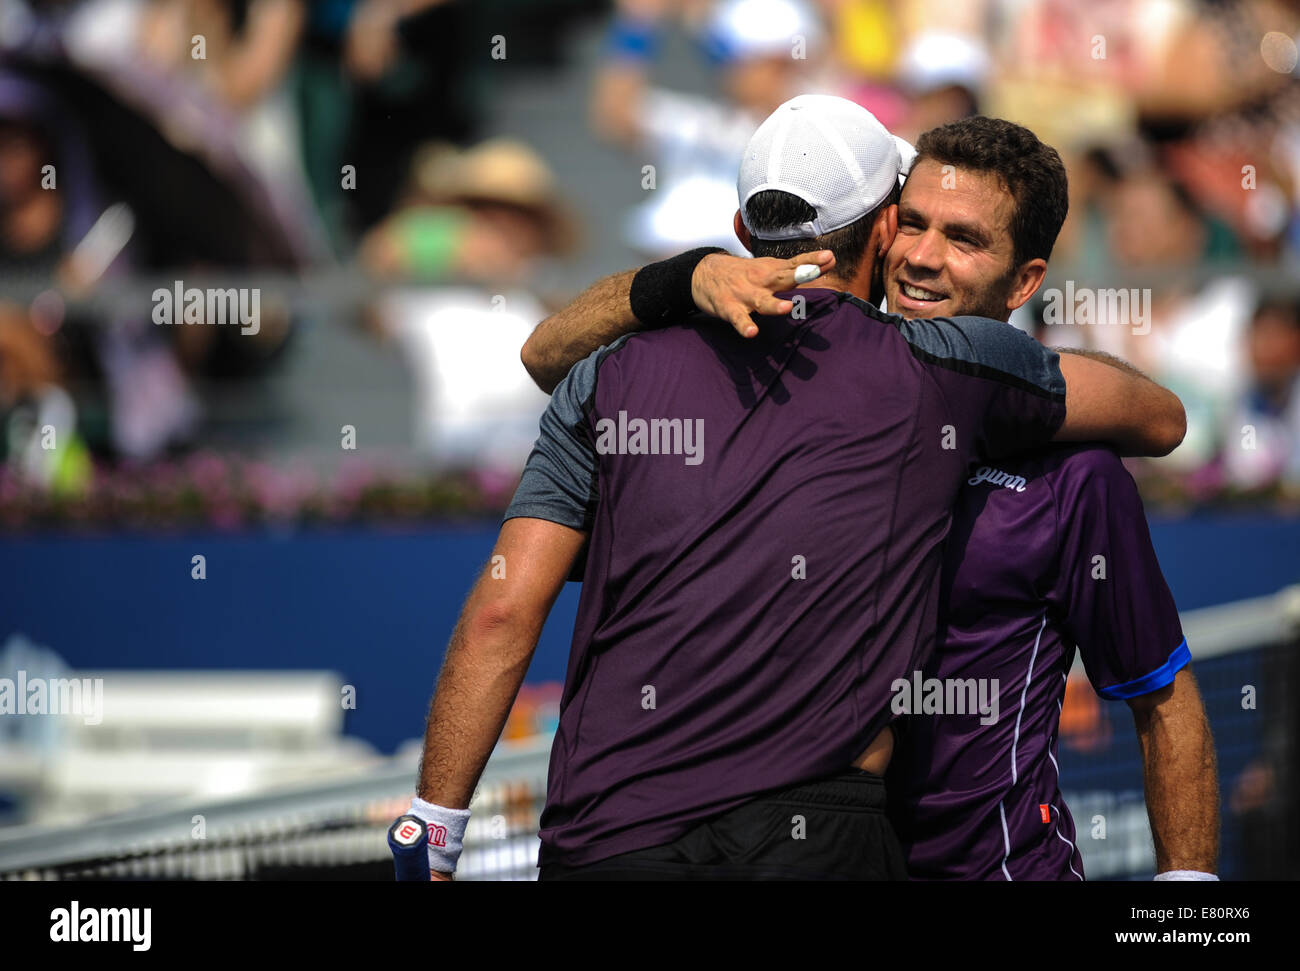 Shenzhen, China's Guangdong Province. 28th Sep, 2014. Jean-Julien Rojer of Netherlands (R) and Horia Tecau of Romania celebrate after the men's doubles final match against Sam Groth and Chris Guccione of Australia at the ATP Shenzhen Open tennis tournament in Shenzhen, south China's Guangdong Province, on Sept. 28, 2014. Jean-Julien Rojer and Horia Tecau won 2-0 and claimed the title. Credit:  Mao Siqian/Xinhua/Alamy Live News Stock Photo